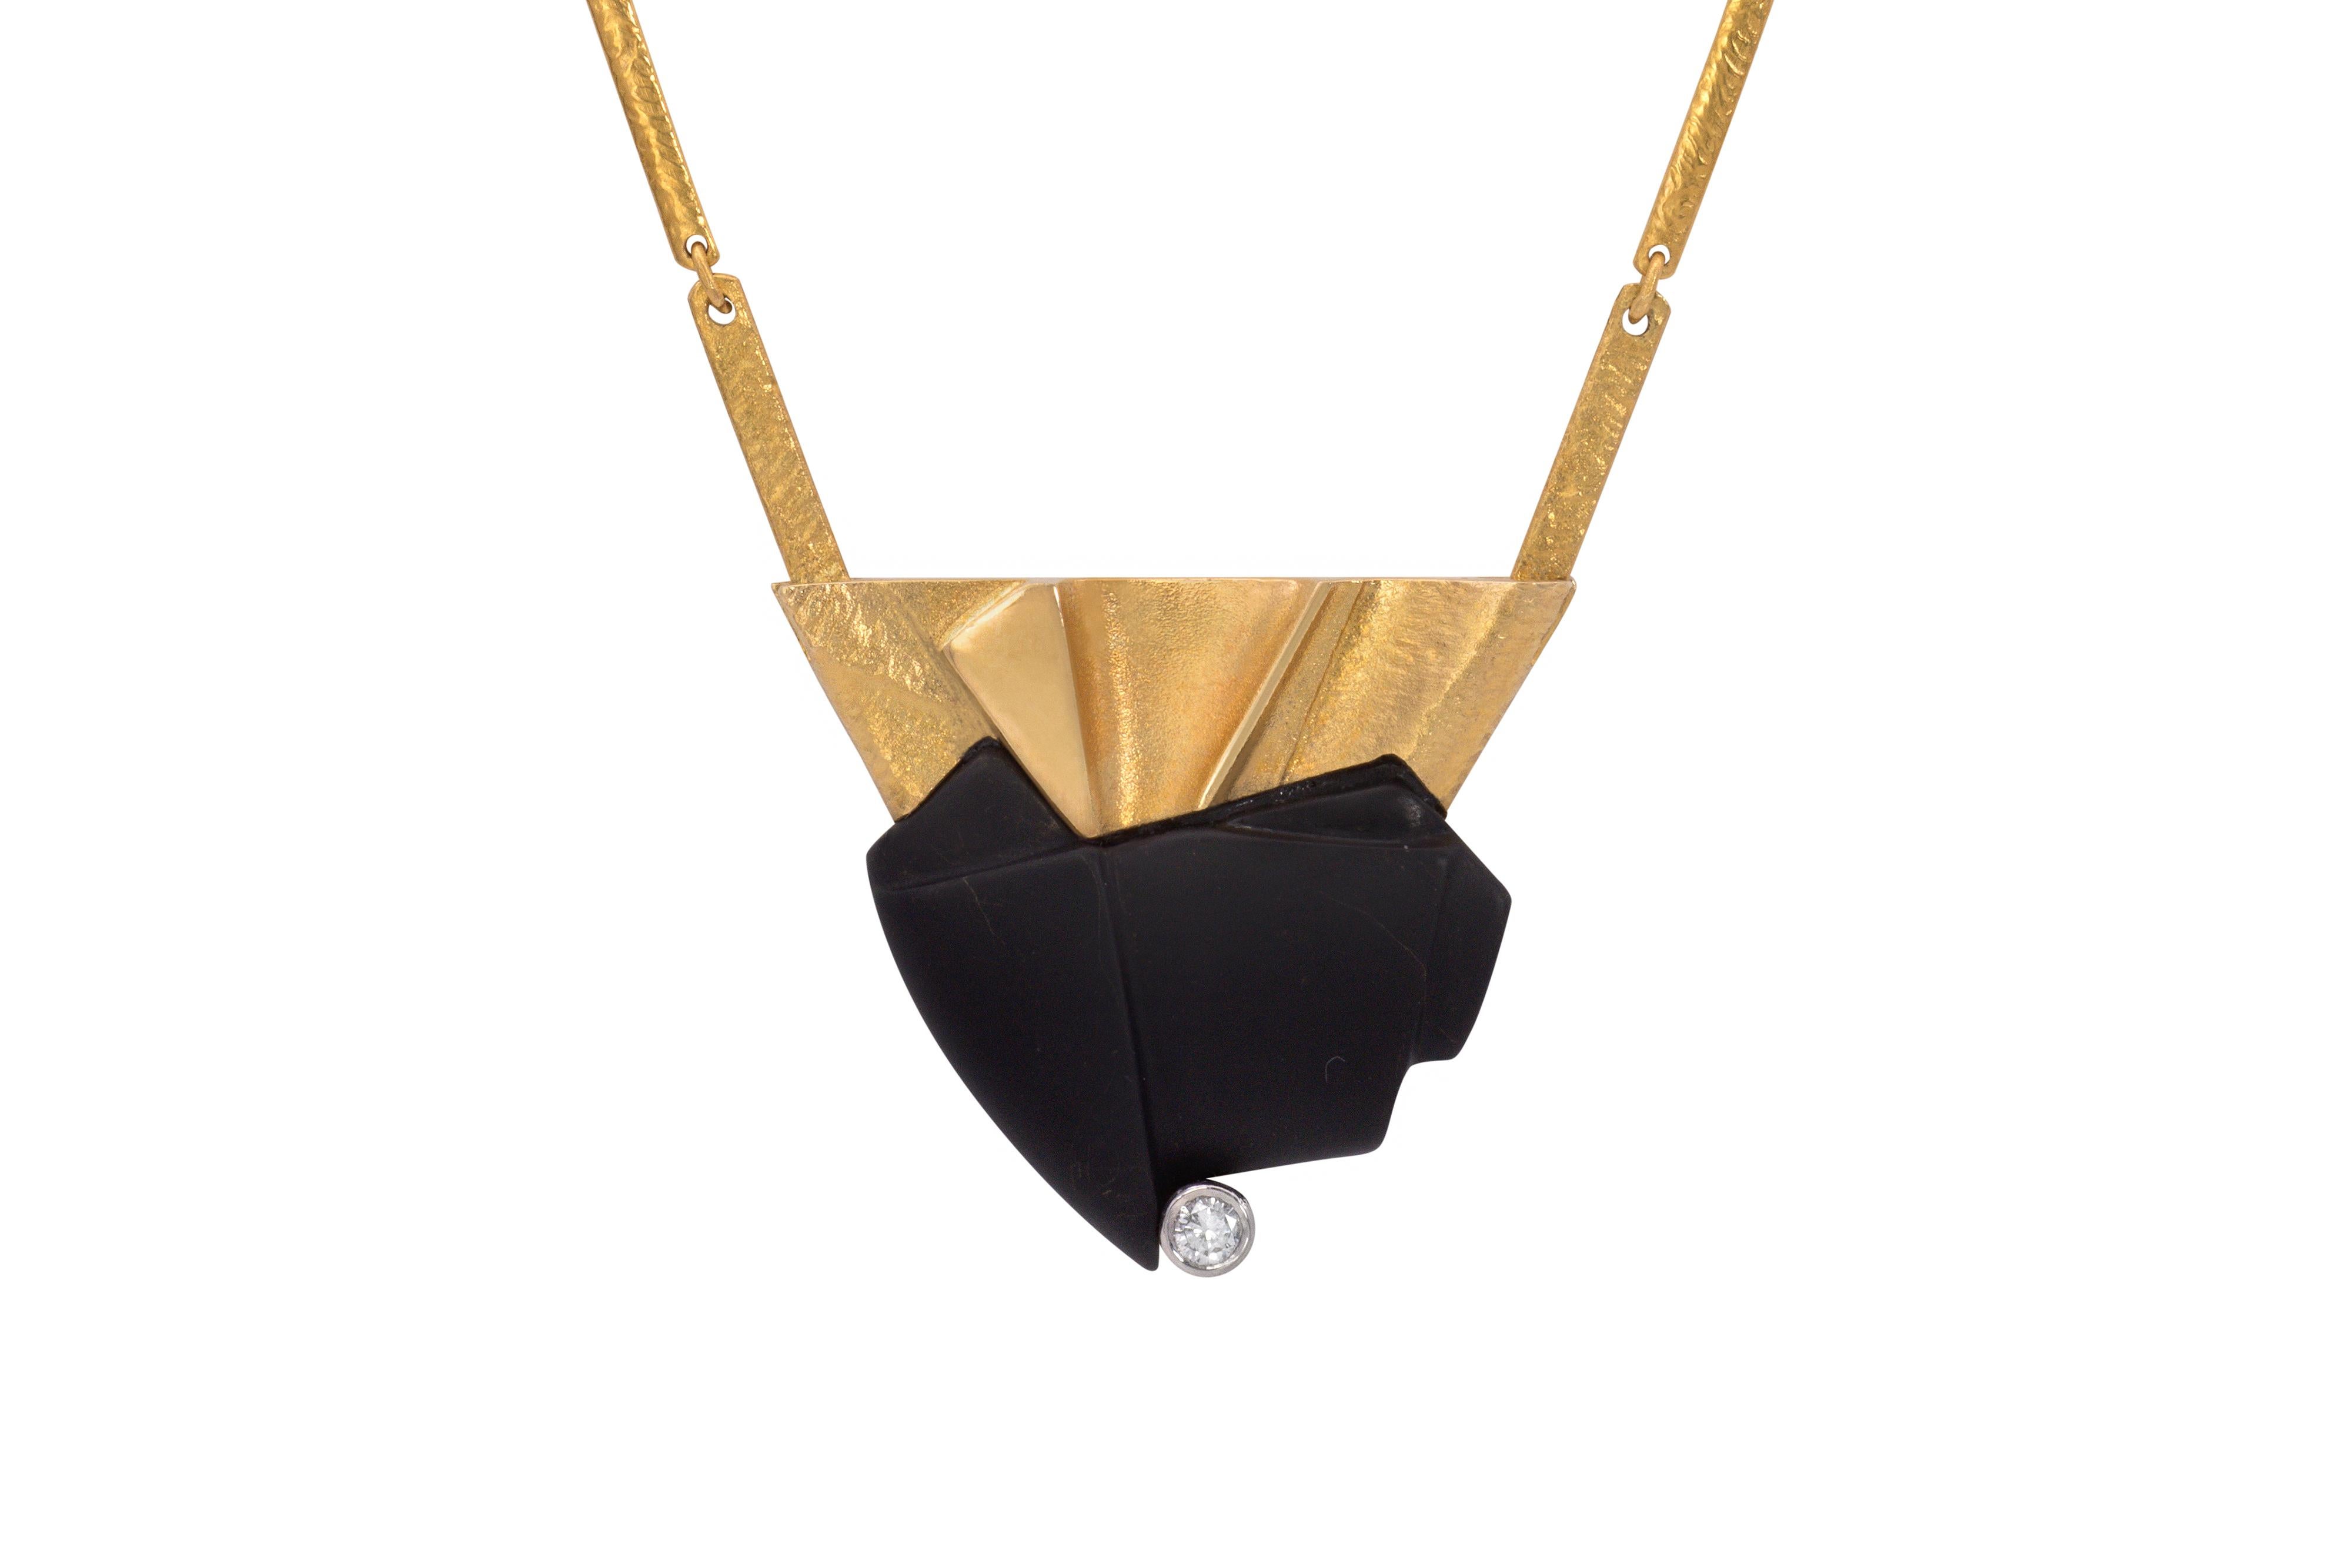 An onyx, diamond, and 18 karat gold necklace, by Zoltan Popovitz, for Lapponia 1990. The necklace is stamped with Finnish hallmarks, maker's mark, 750, and date mark for 1990. 

The hand-textured chain is 16.50